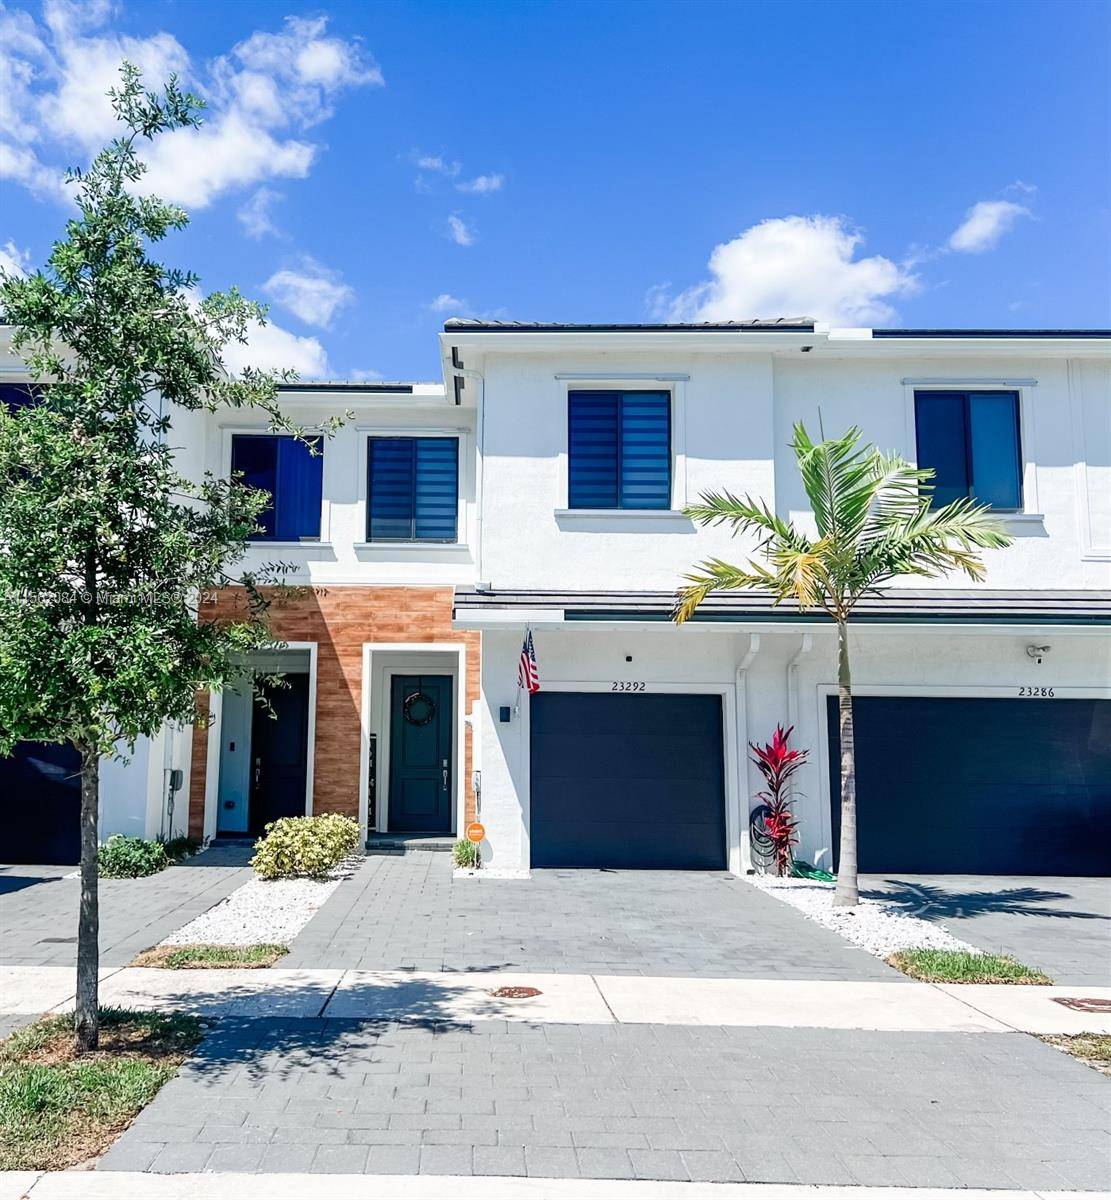 A contemporary townhouse, constructed in 2021, boasts three bedrooms, two full bathrooms, one half bathroom, and a single car garage in the desirable neighborhood of The Landings.